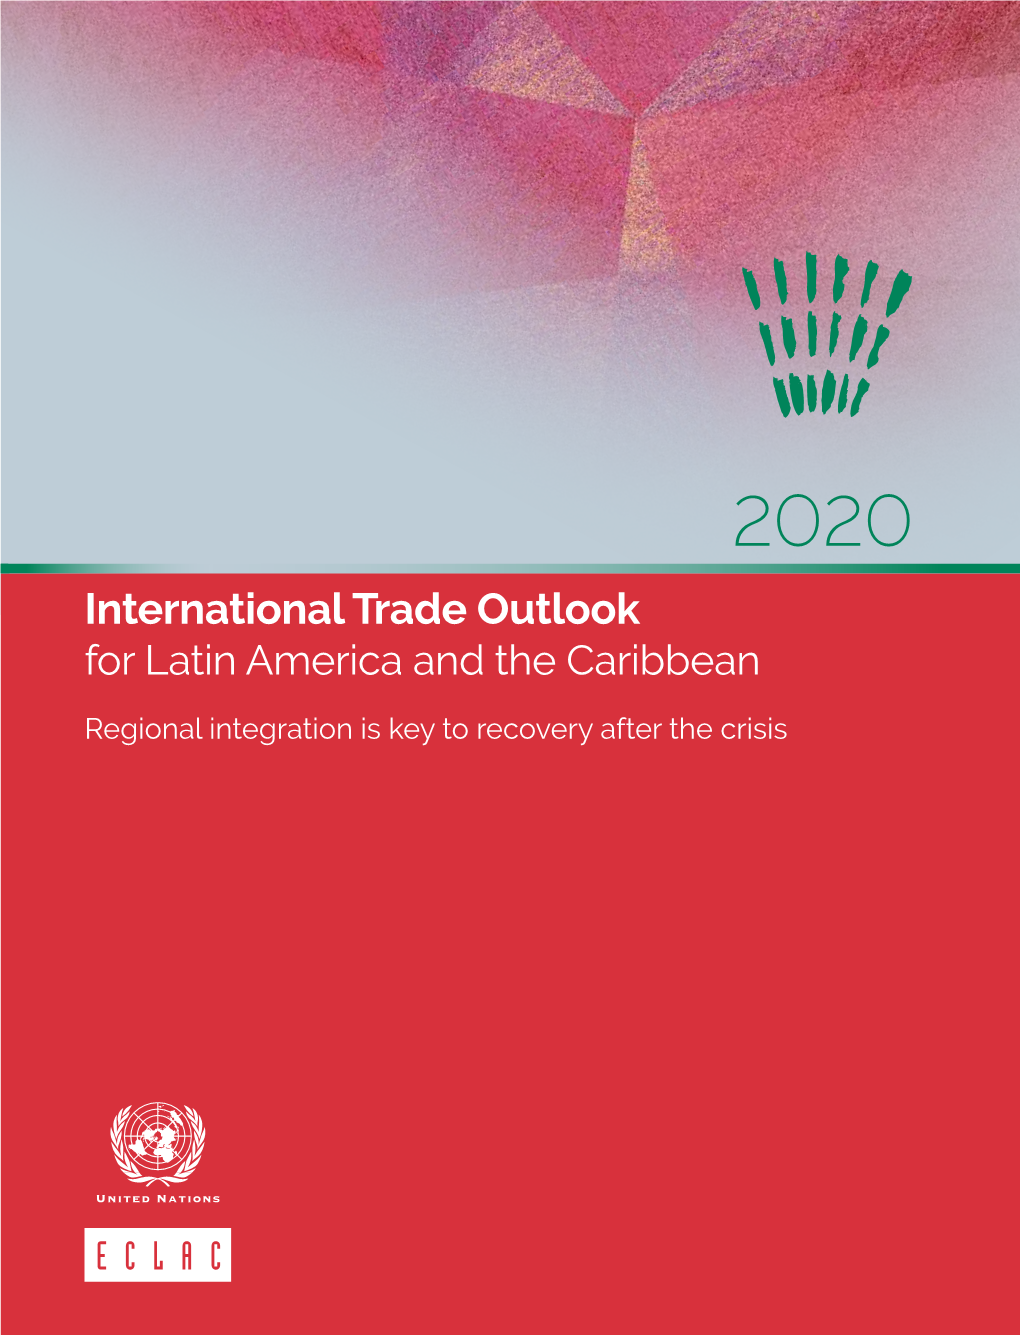 International Trade Outlook for Latin America and the Caribbean 2020